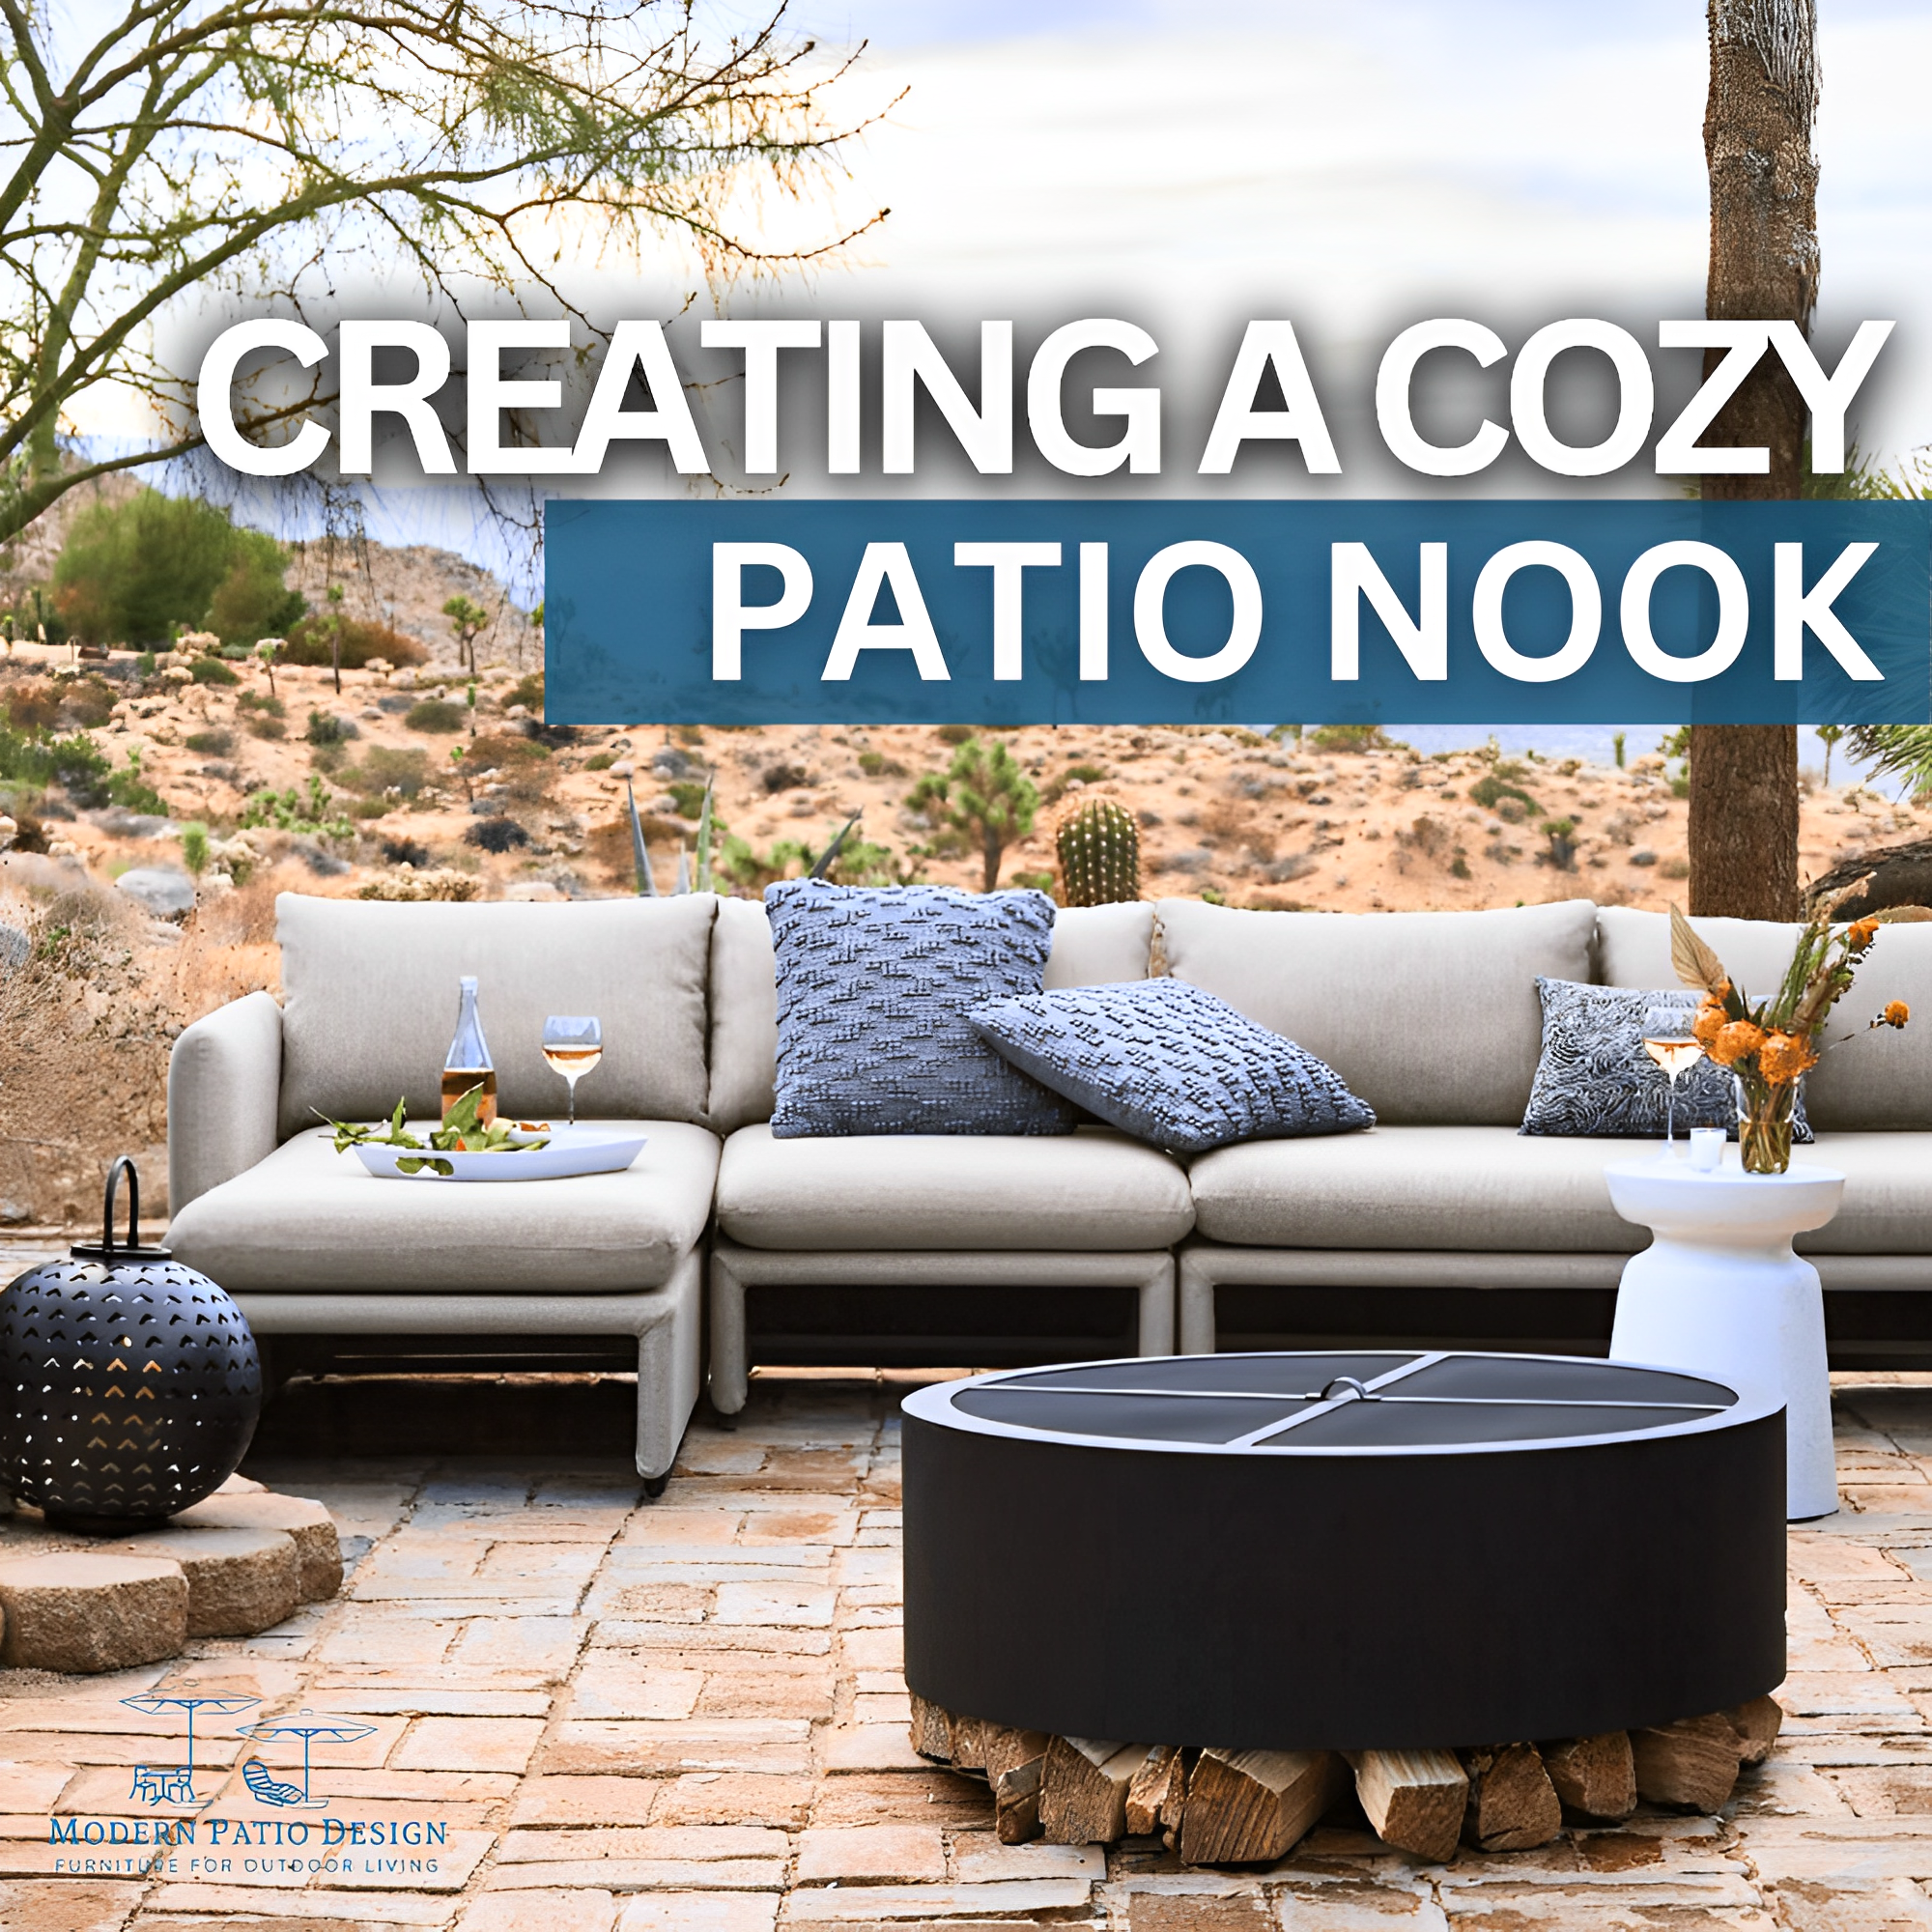 Hygge Decor: Your Guide To Creating a Cozy Patio Nook